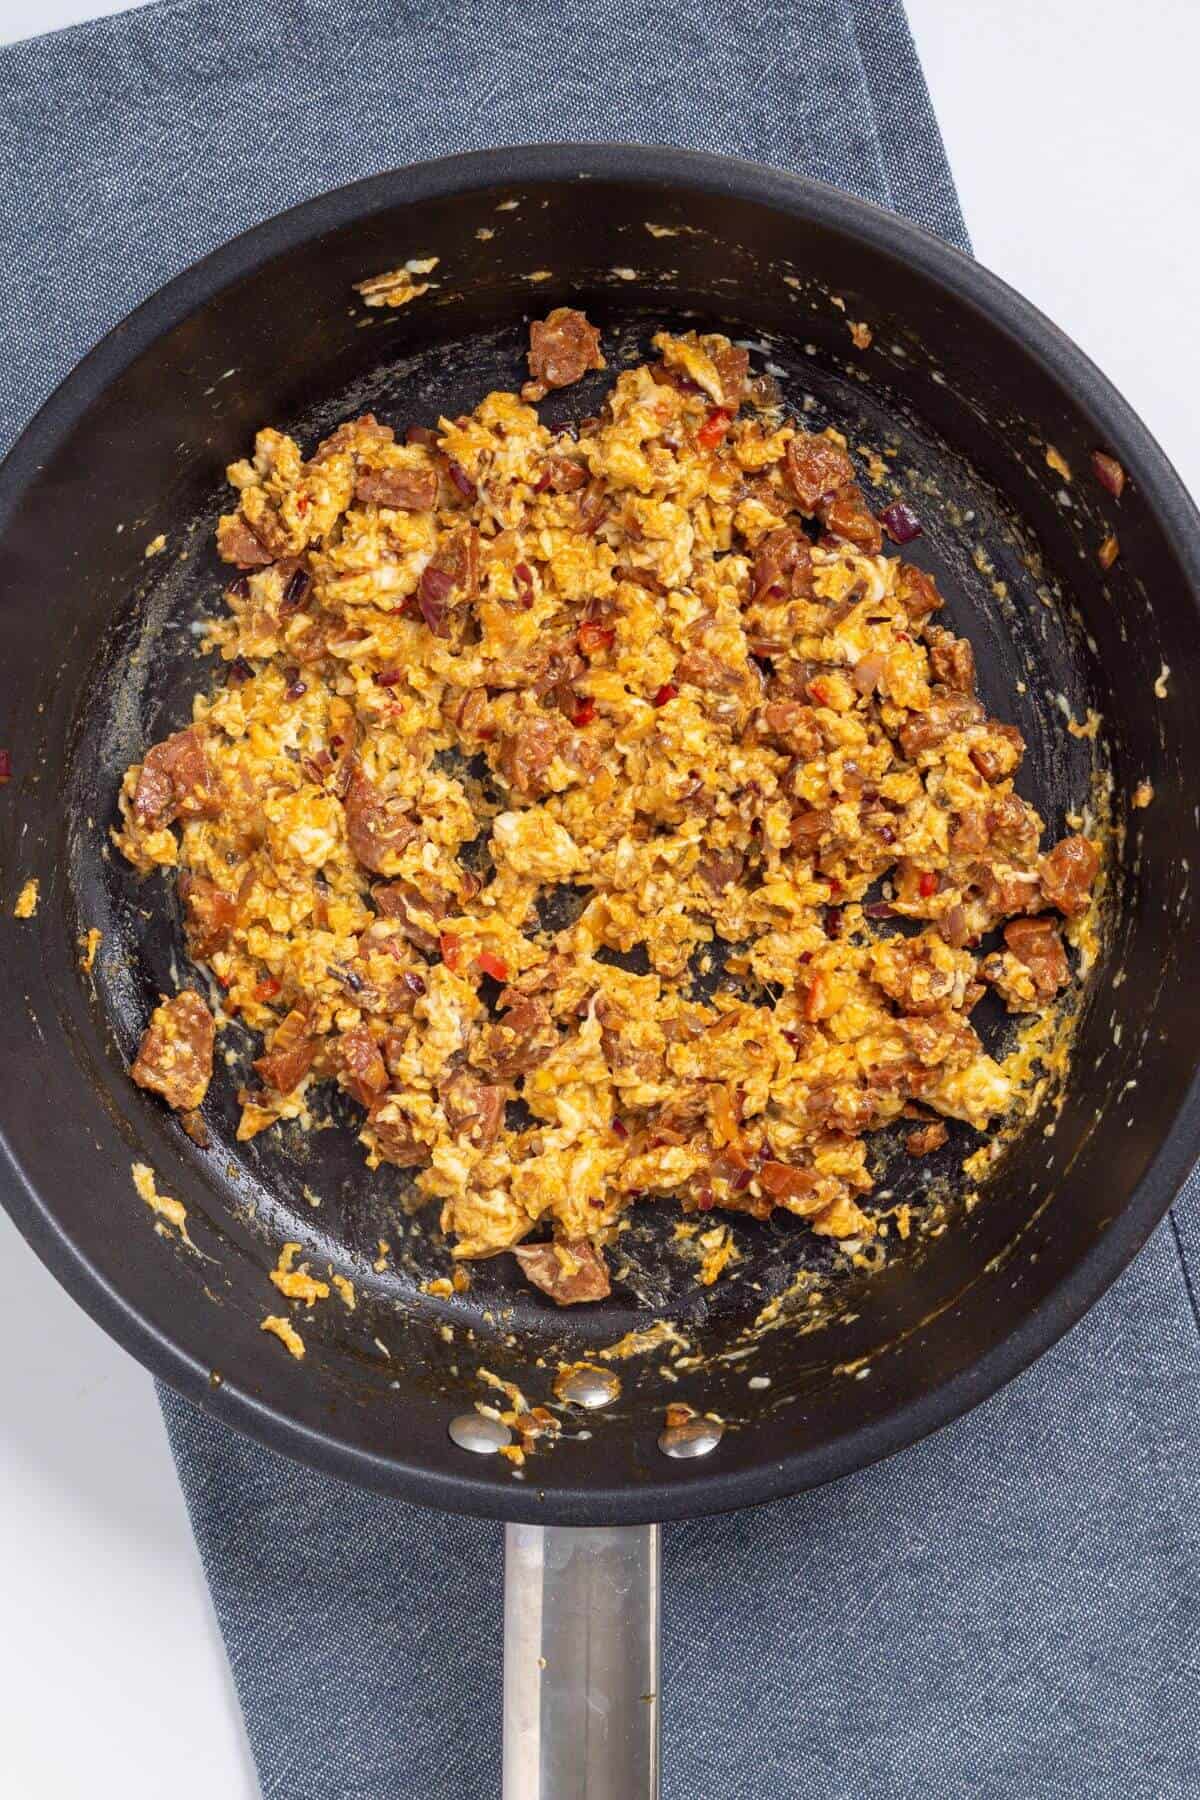 Cooked egg and chorizo mixture in skillet.